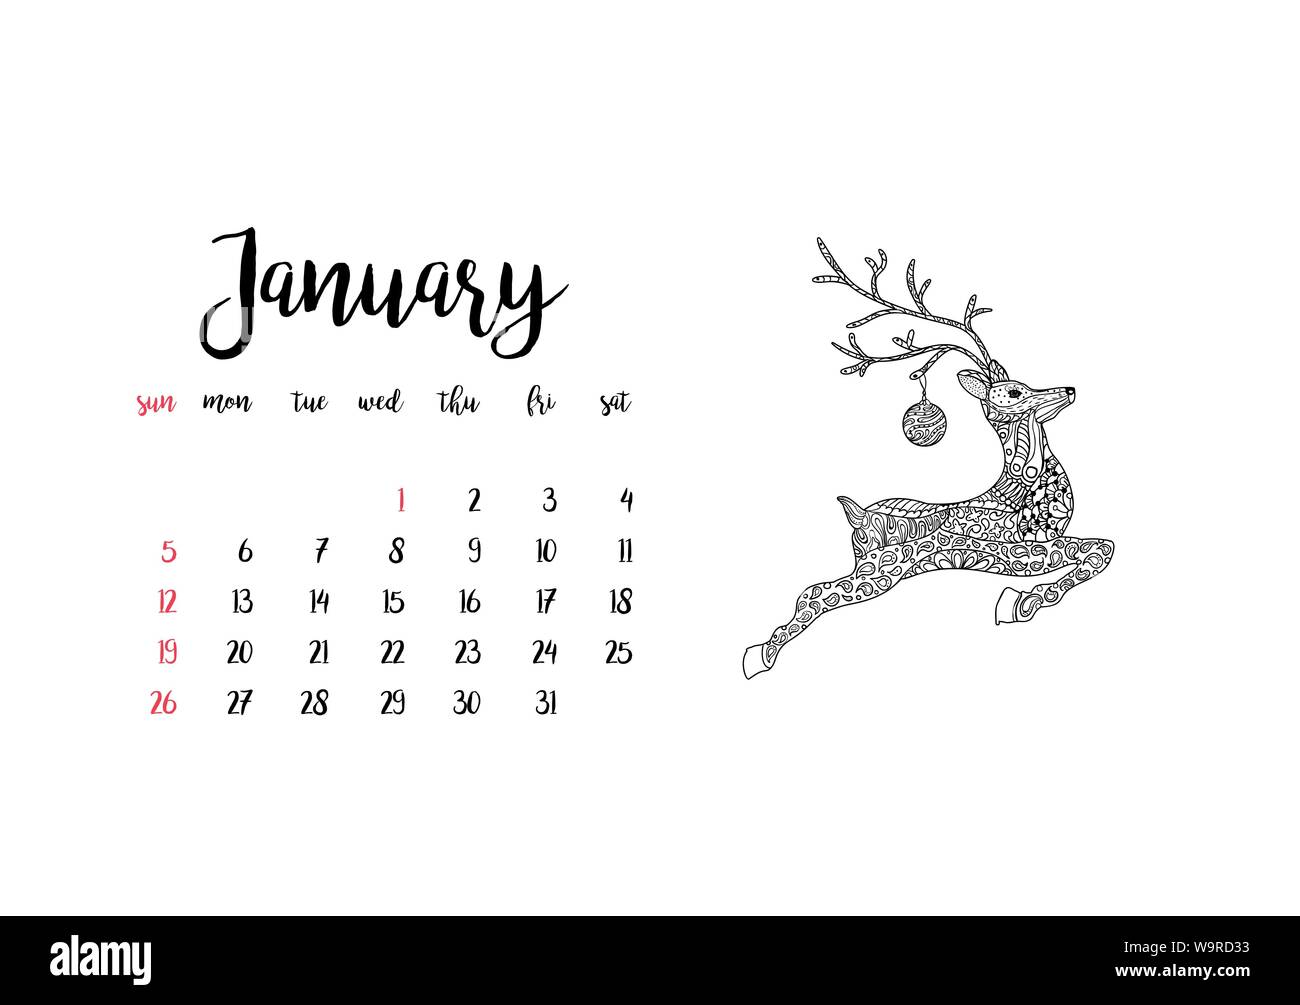 monthly-desk-calendar-horizontal-template-2020-for-month-january-week